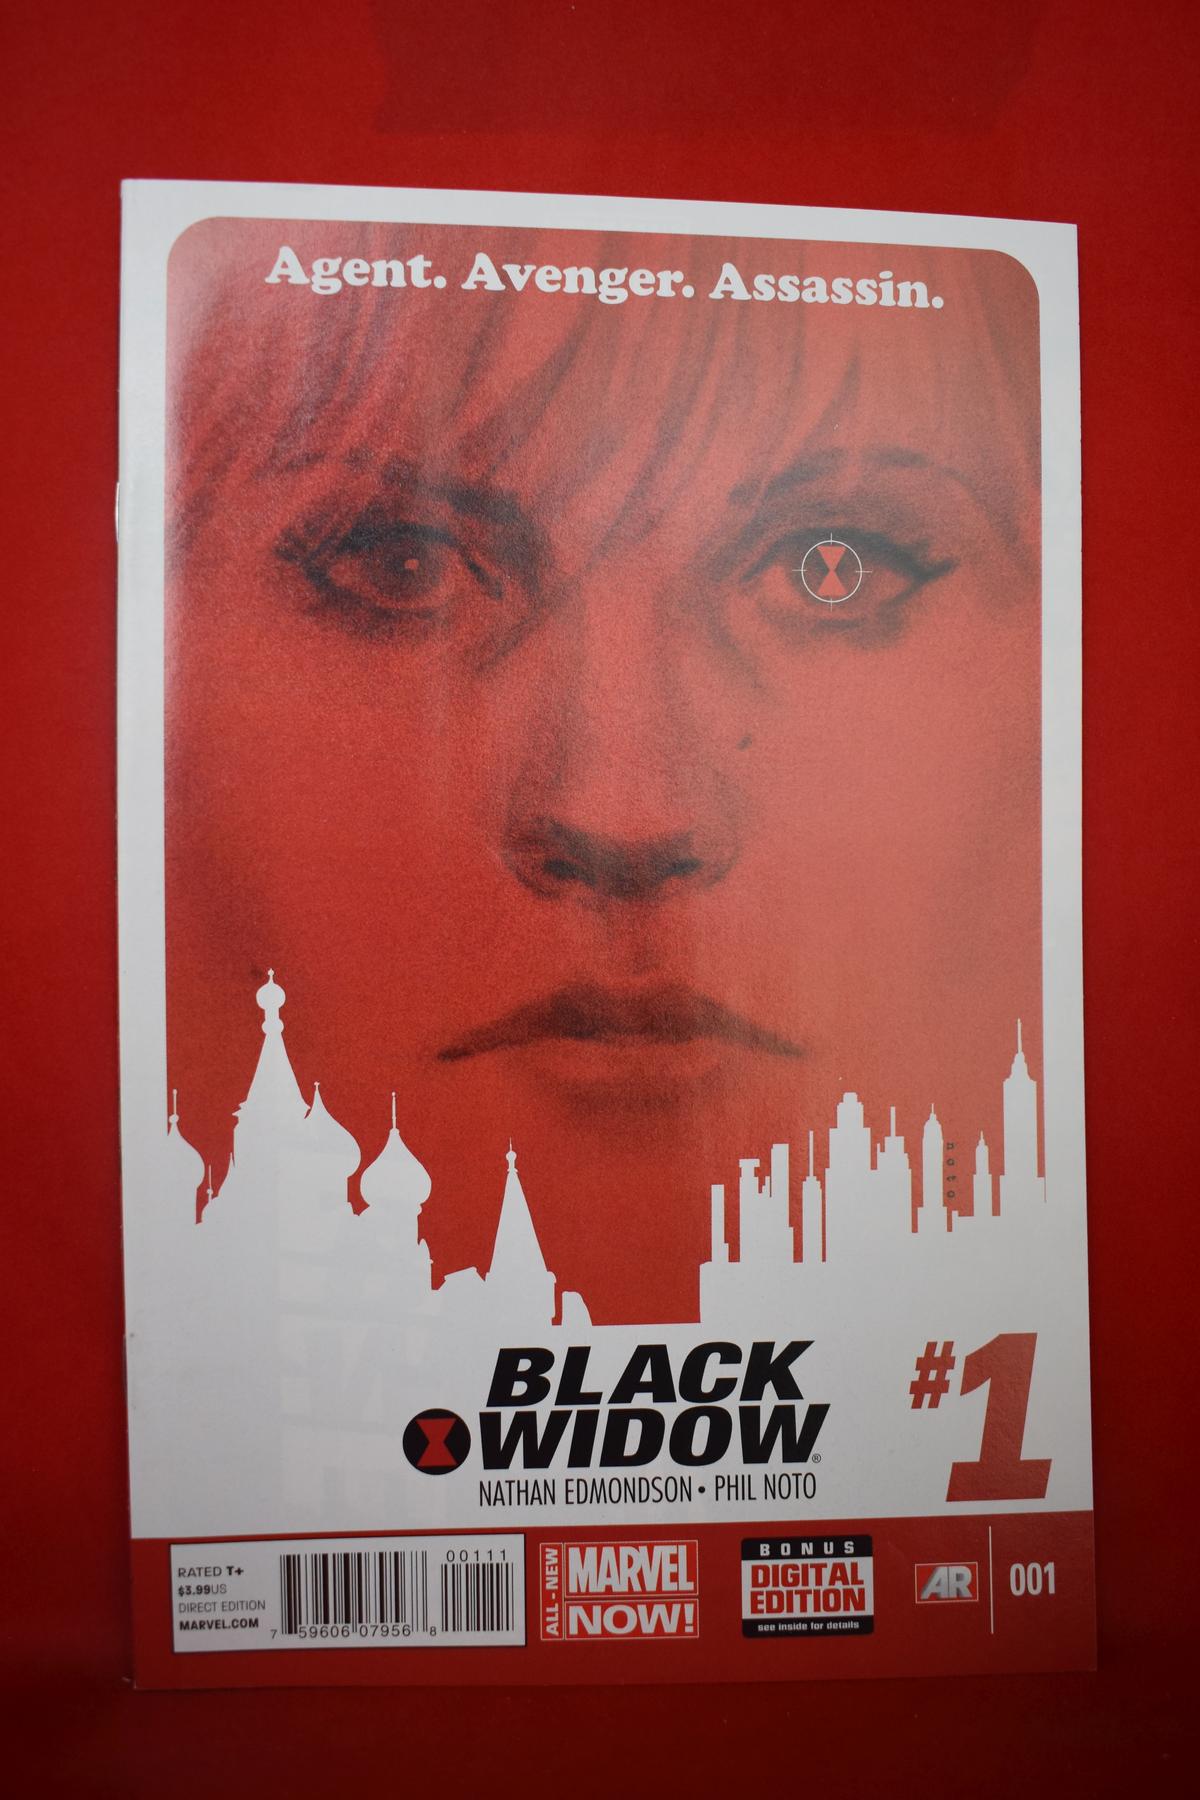 BLACK WIDOW #1 | 1ST ISSUE - PHIL NOTO COVER ART